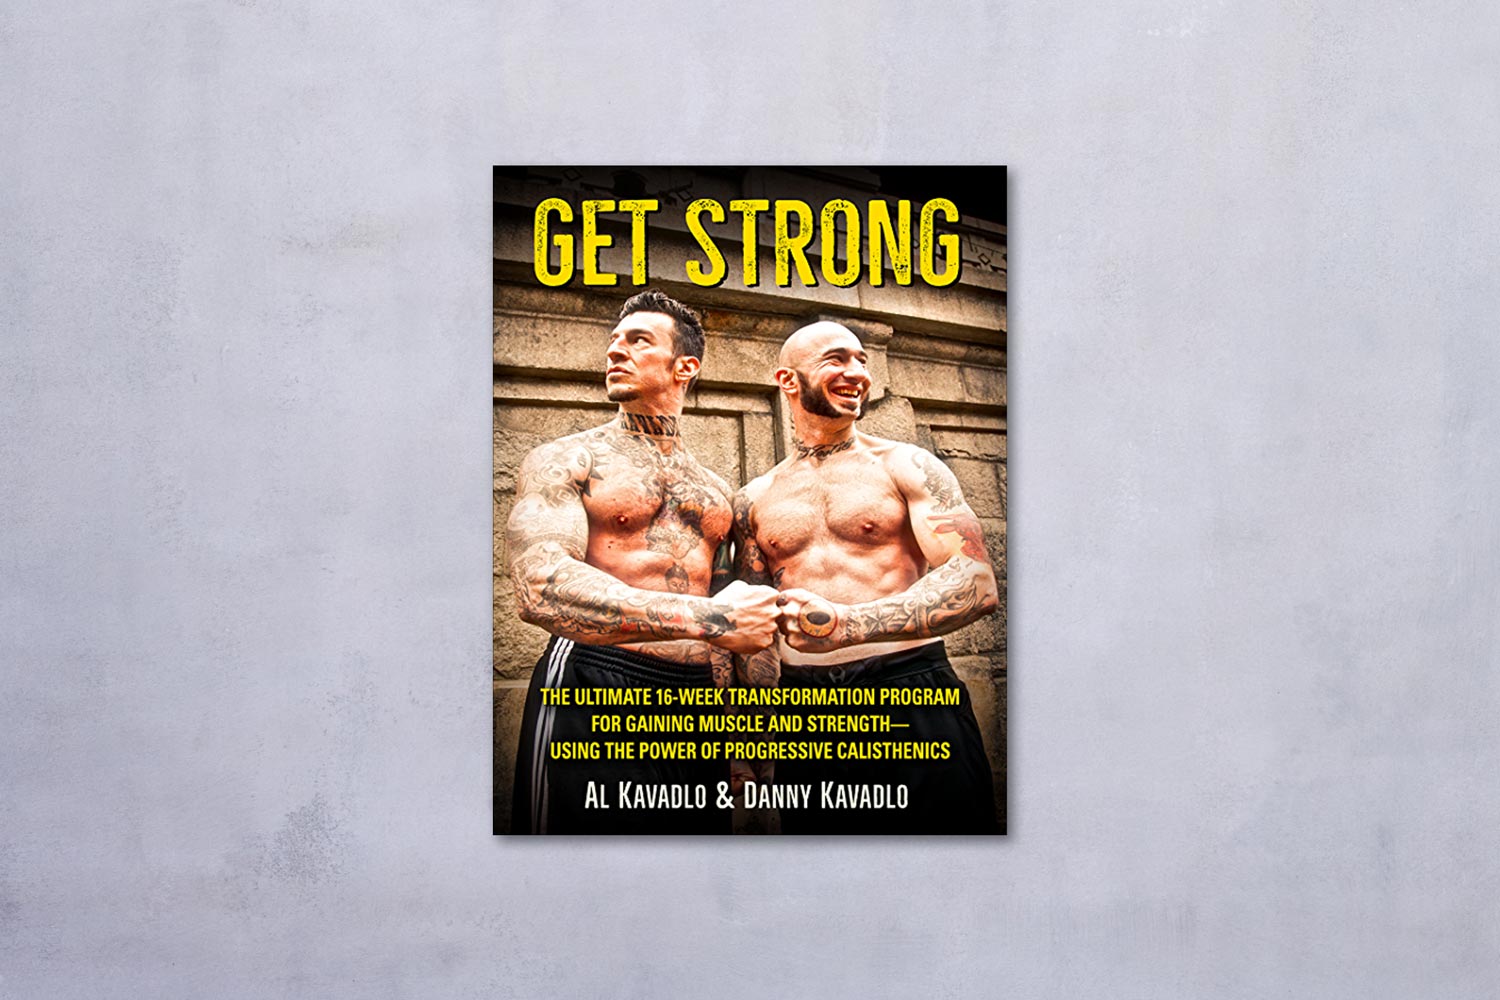 Get Strong by Al Kavadlo & Danny Kavadlo book cover